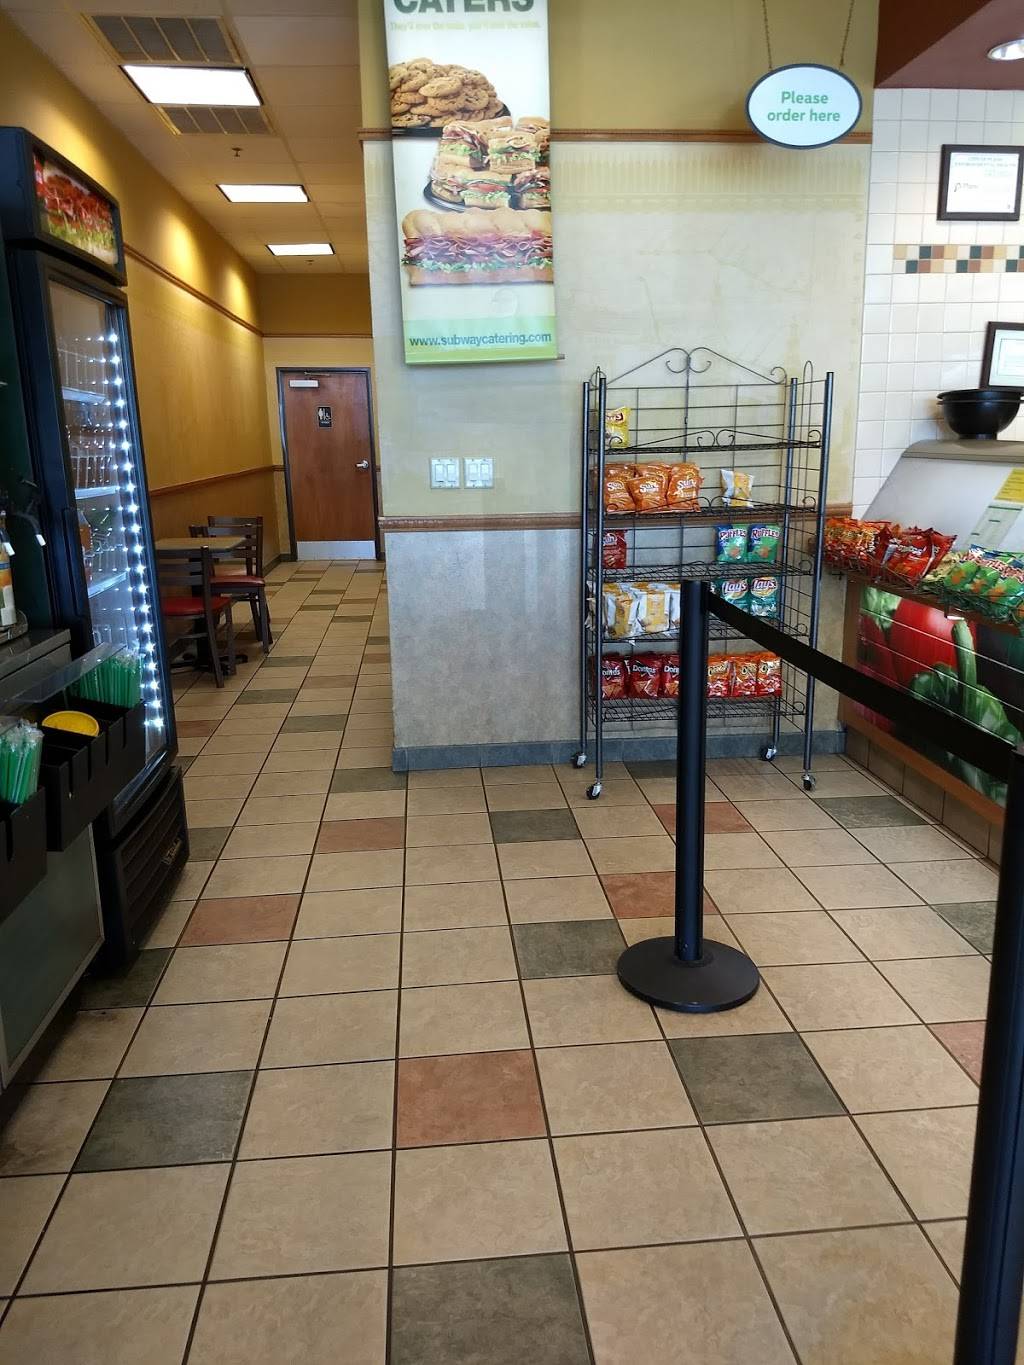 Subway | 340 Coit Rd Suite 300, Space 29, Plano, TX 75075 | Phone: (972) 801-9885